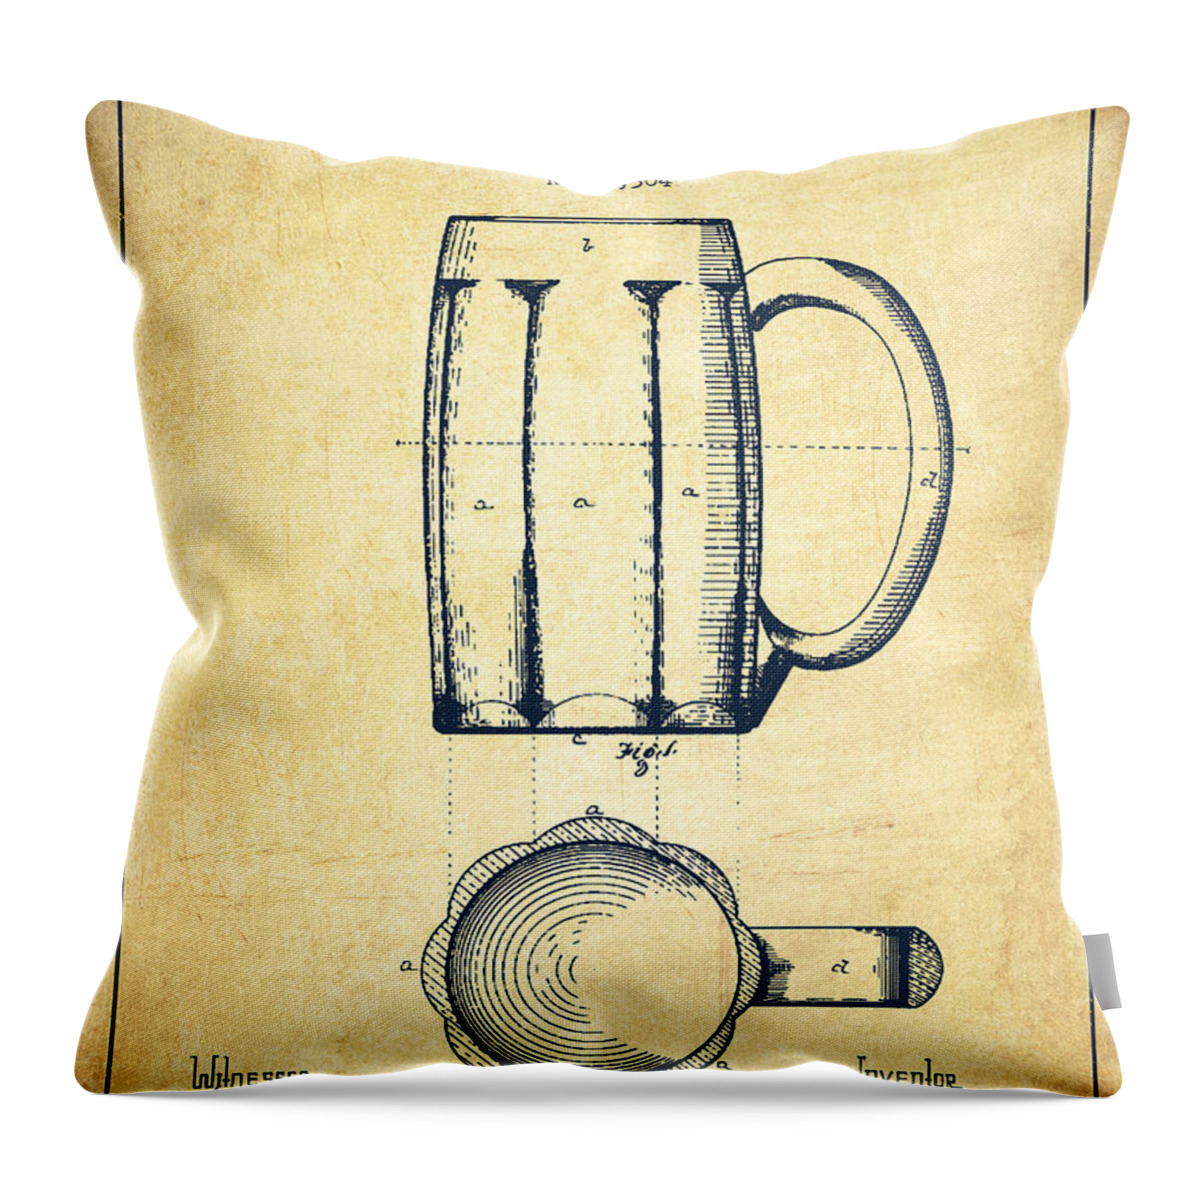 Beer Mug Throw Pillow featuring the digital art Beer Mug Patent Drawing from 1876 - Vintage by Aged Pixel